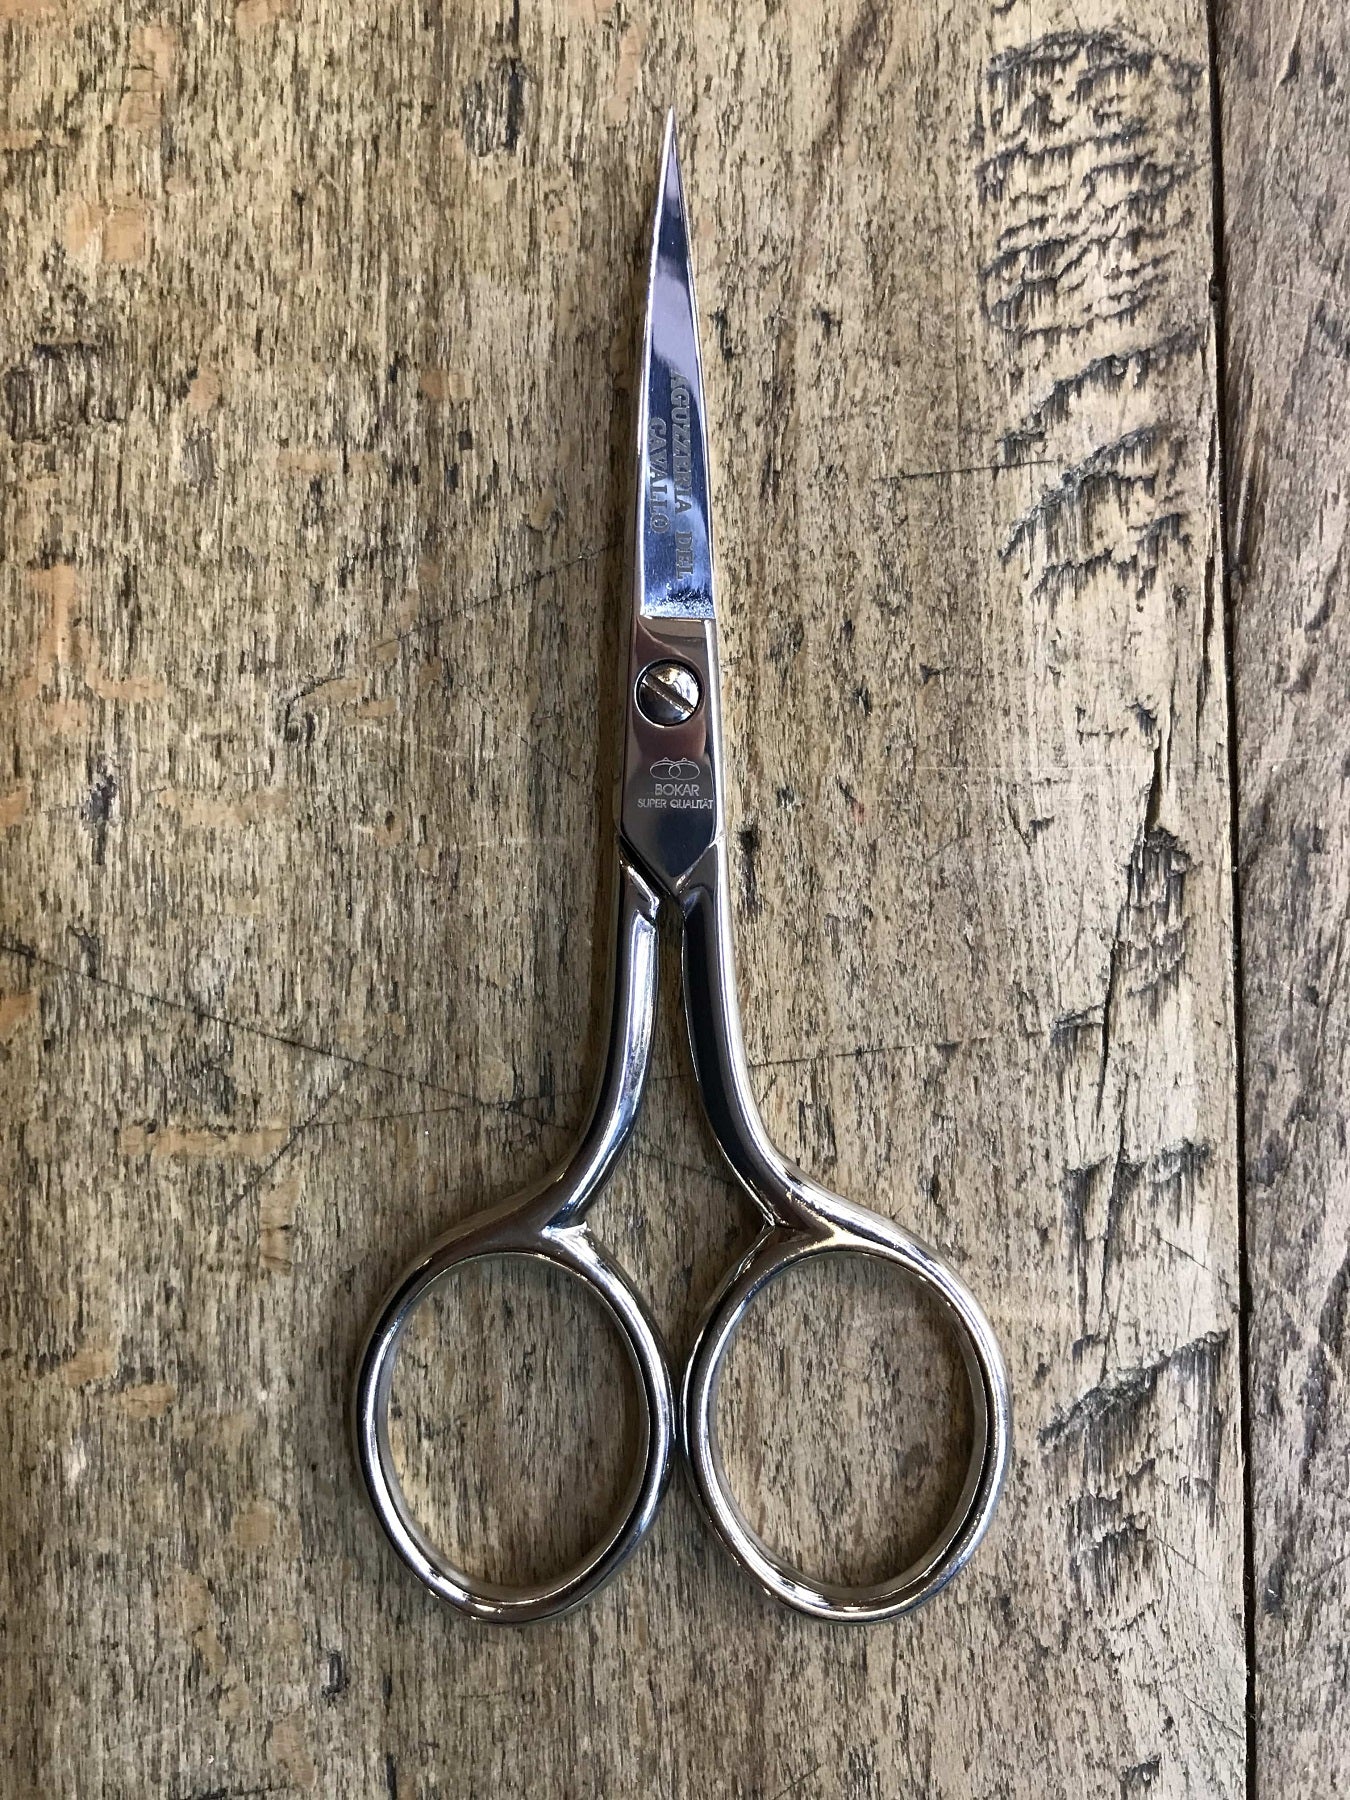 Embroidery and sewing scissors